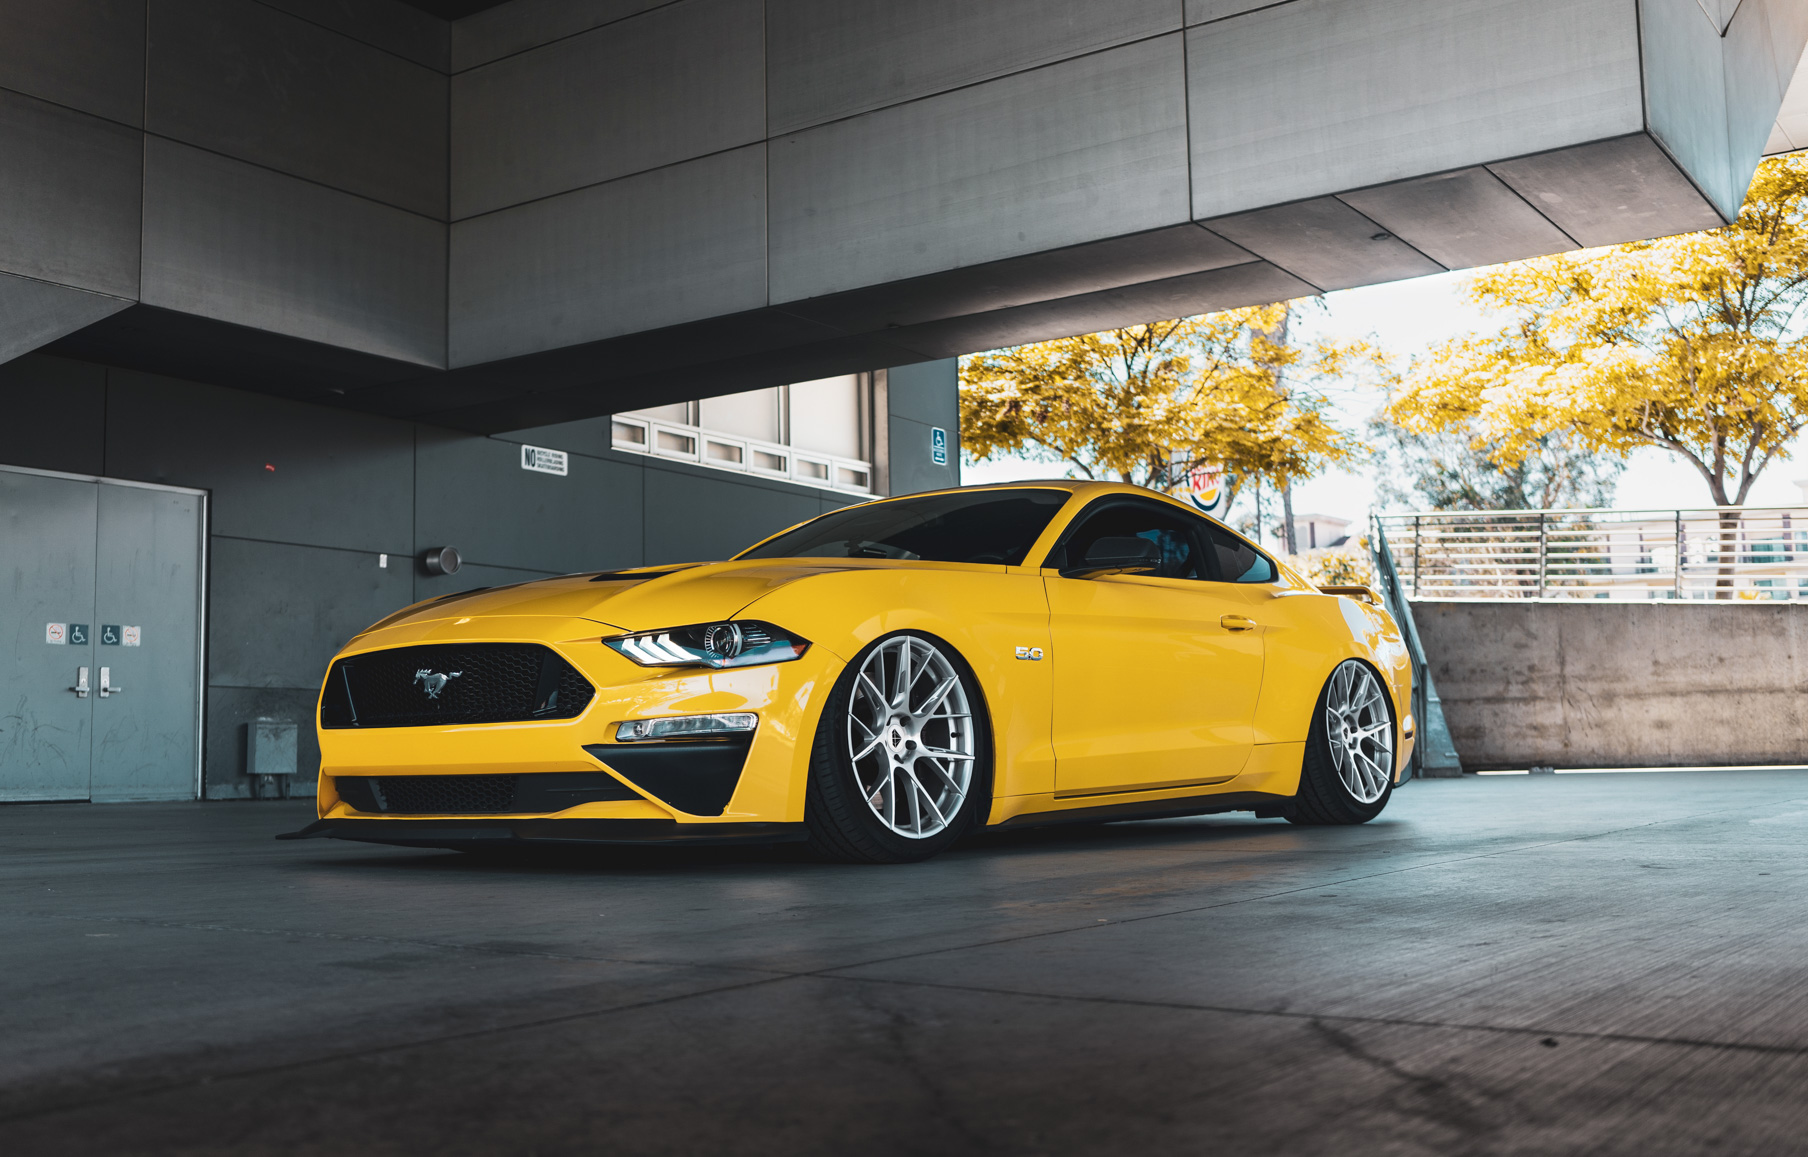 S650 Mustang Blaque Diamond BD-F18 BD-D25 BD-F29 Flow Forged Series - Vibe Motorsports 2018_Ford_Mustang_GT_Blaque_Diamond_Wheels_BDF18_20_inch_Brushed_Silver-13-1